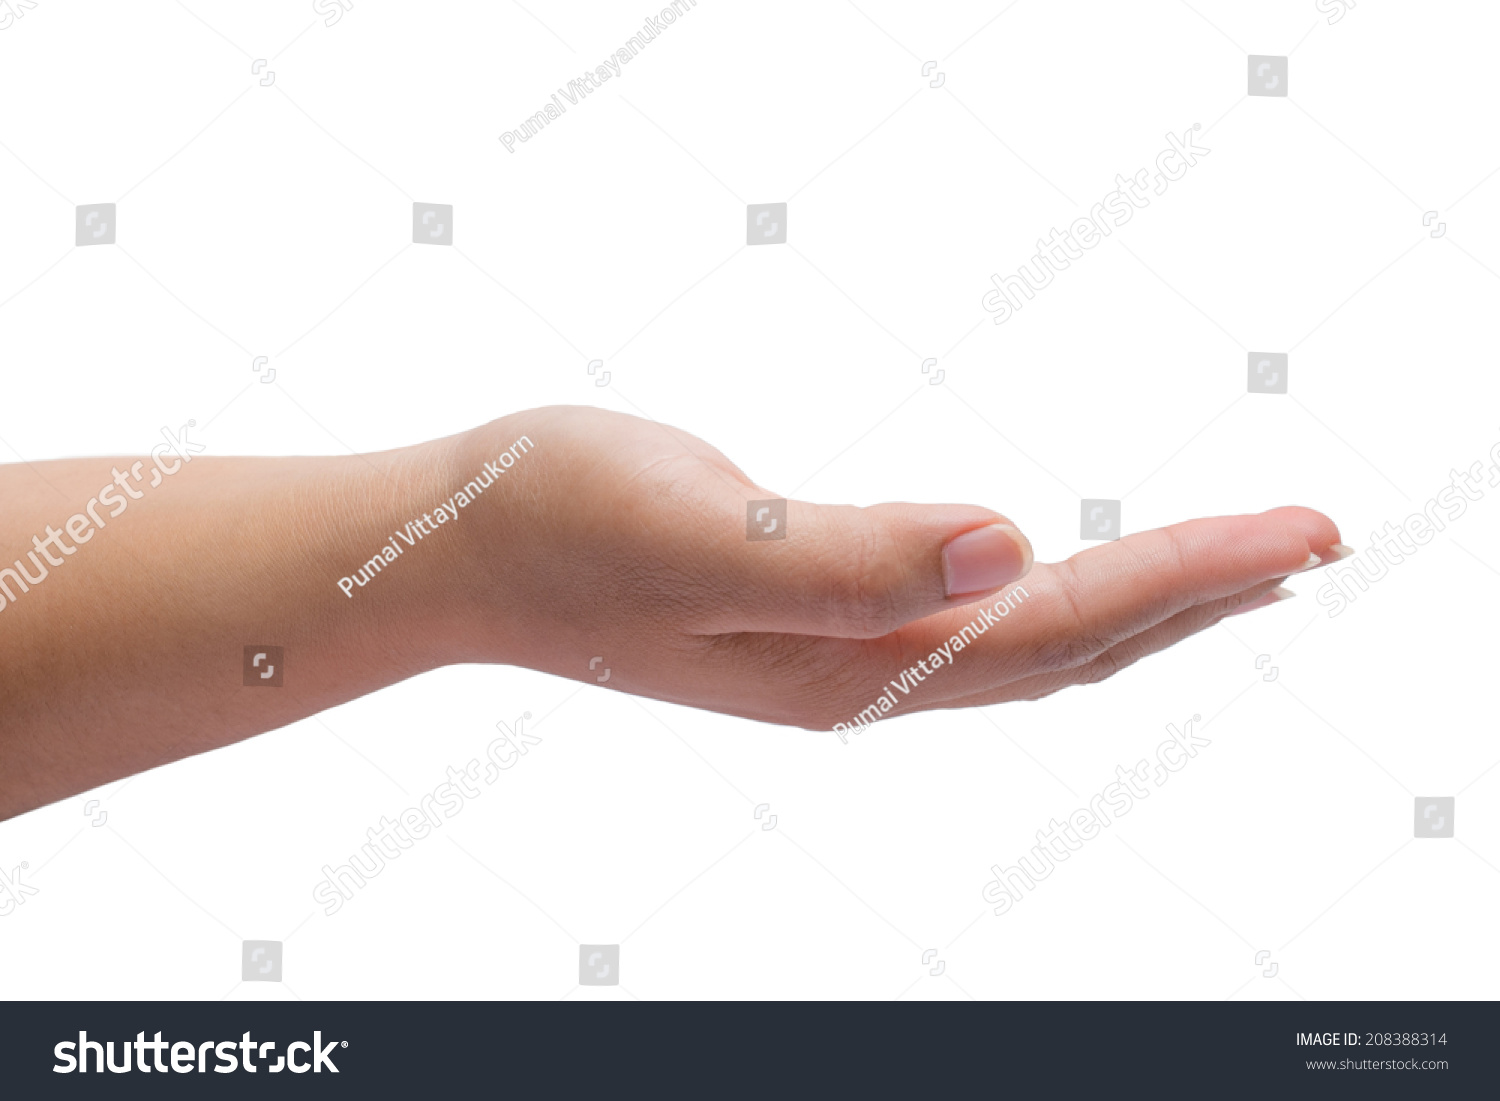 Woman Hand Isolated On White Stock Photo 208388314 : Shutterstock